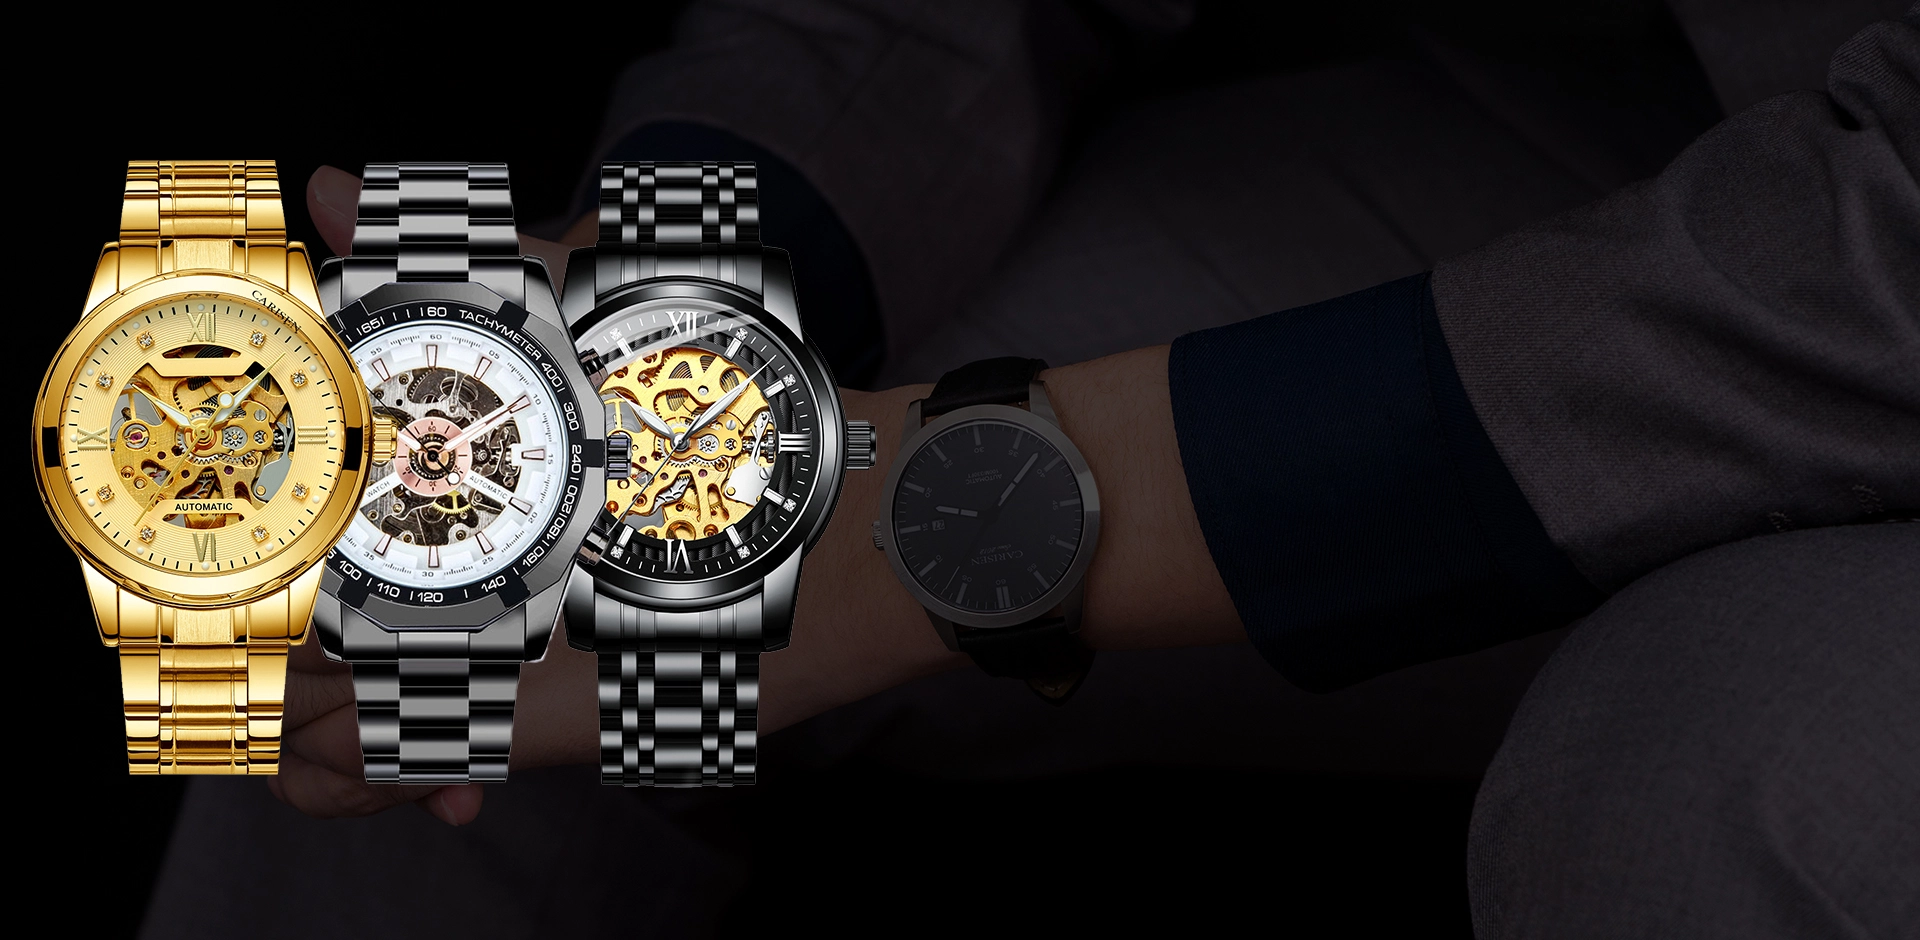 Carisen Watches & Accessory